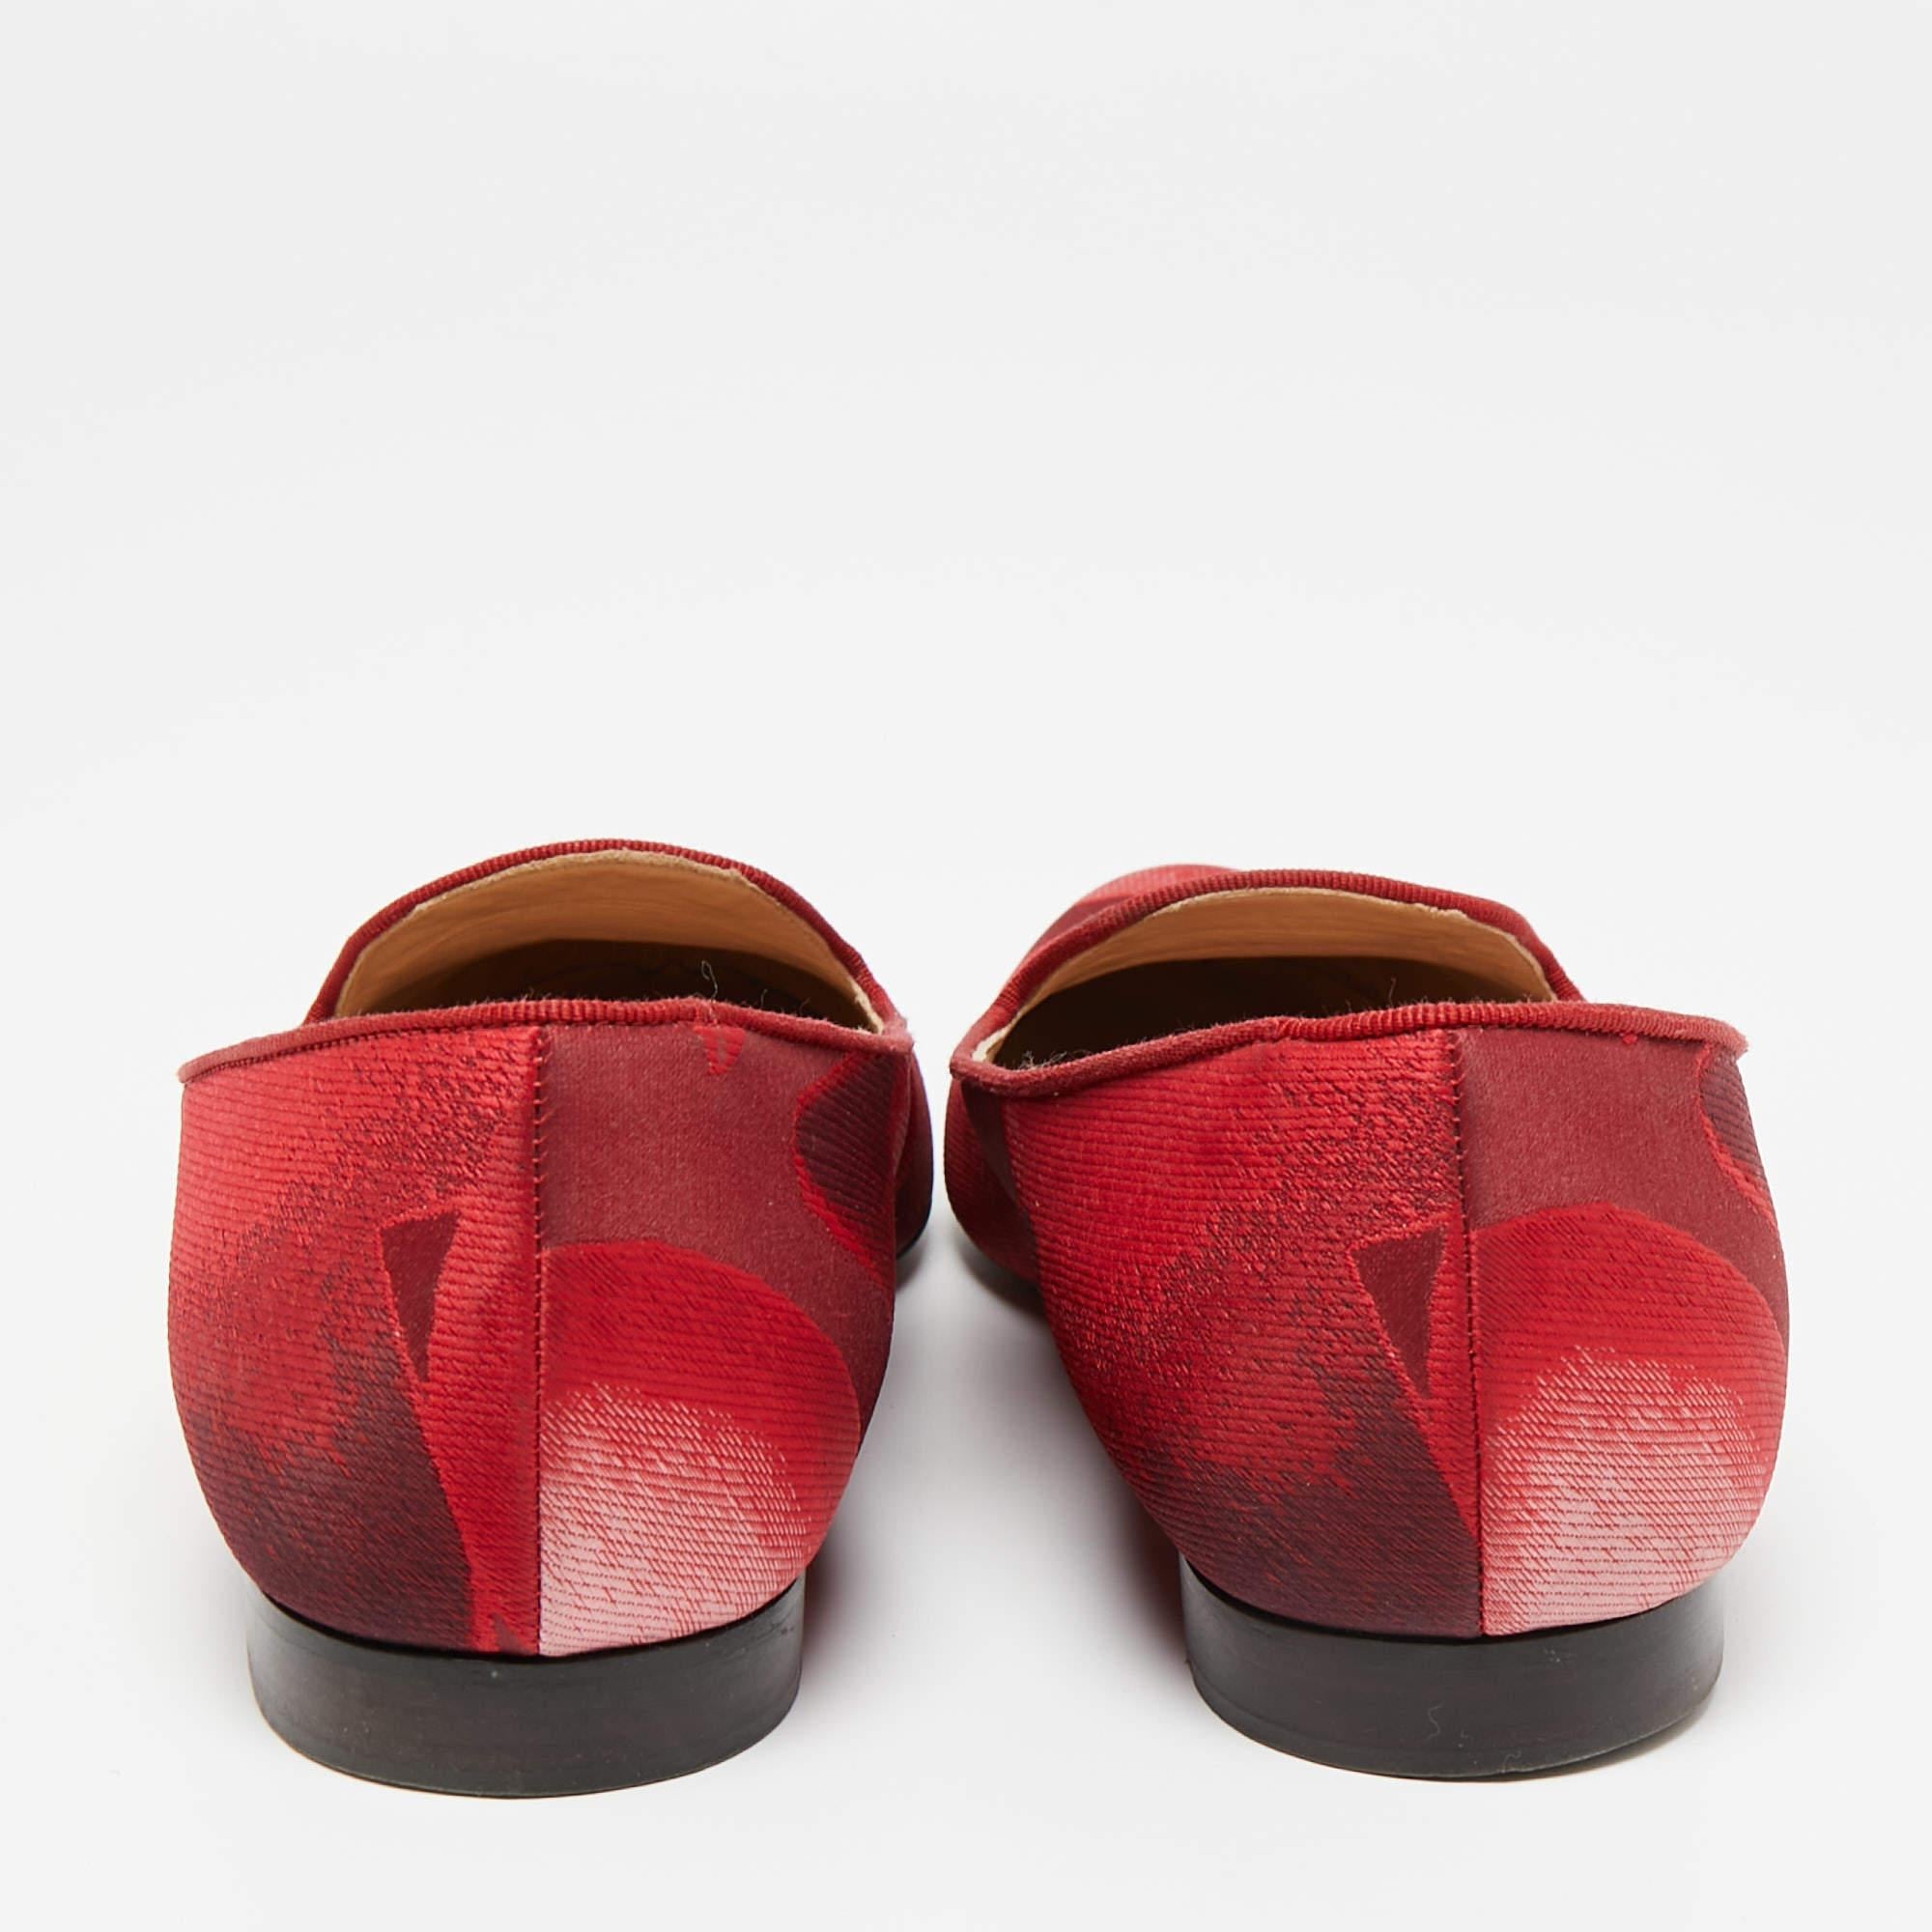 Valentino Red Satin Embroidered Smoking Slippers Size 40 In Good Condition For Sale In Dubai, Al Qouz 2